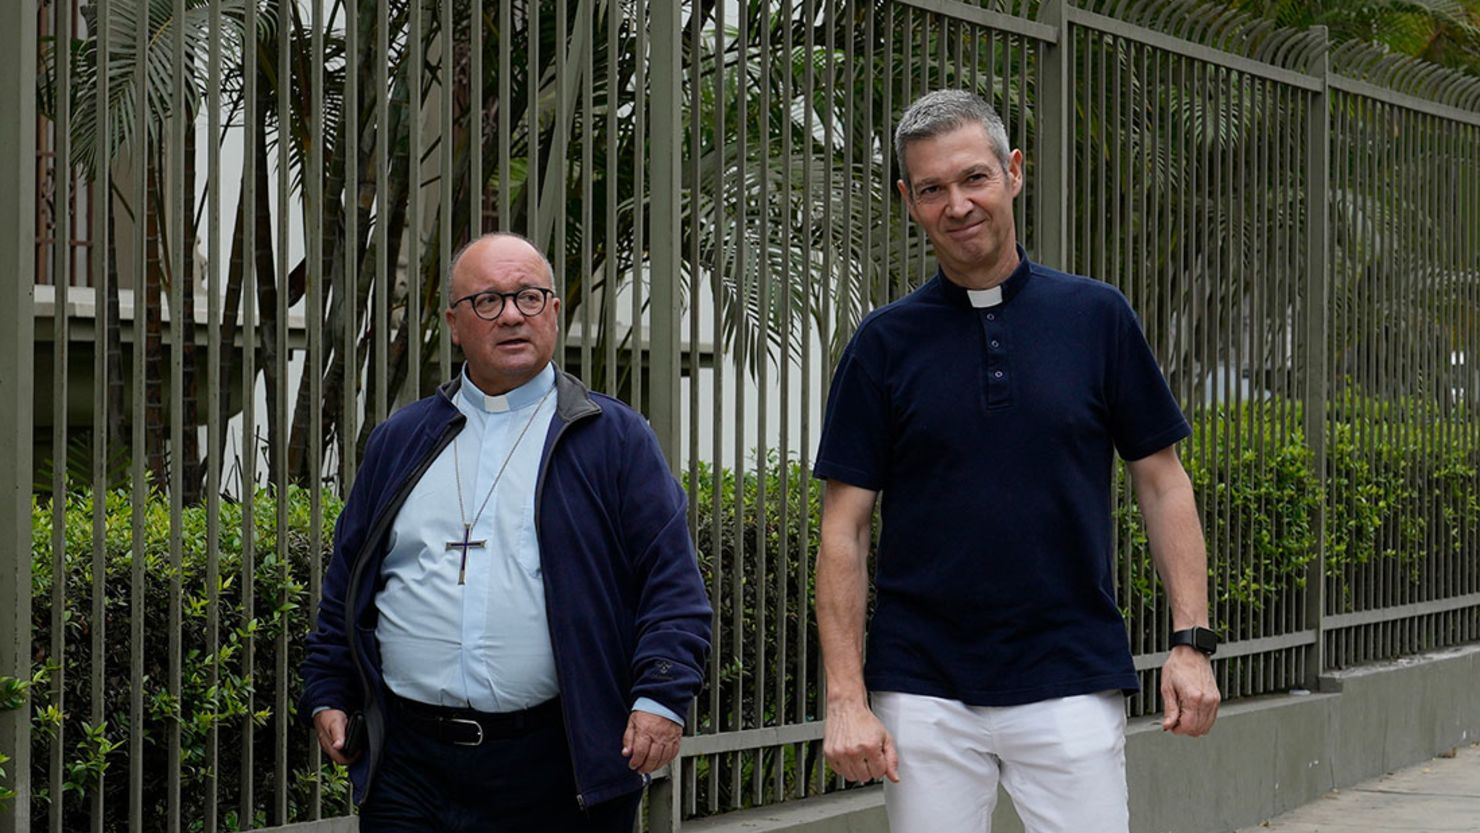 Vatican investigators, Archbishop Charles Scicluna and Monsignor Jordi Bertomeu, arrived in Peru's capital Lima at the end of July to investigate sexual abuse allegations at Sodalitium Christianae Vitae.